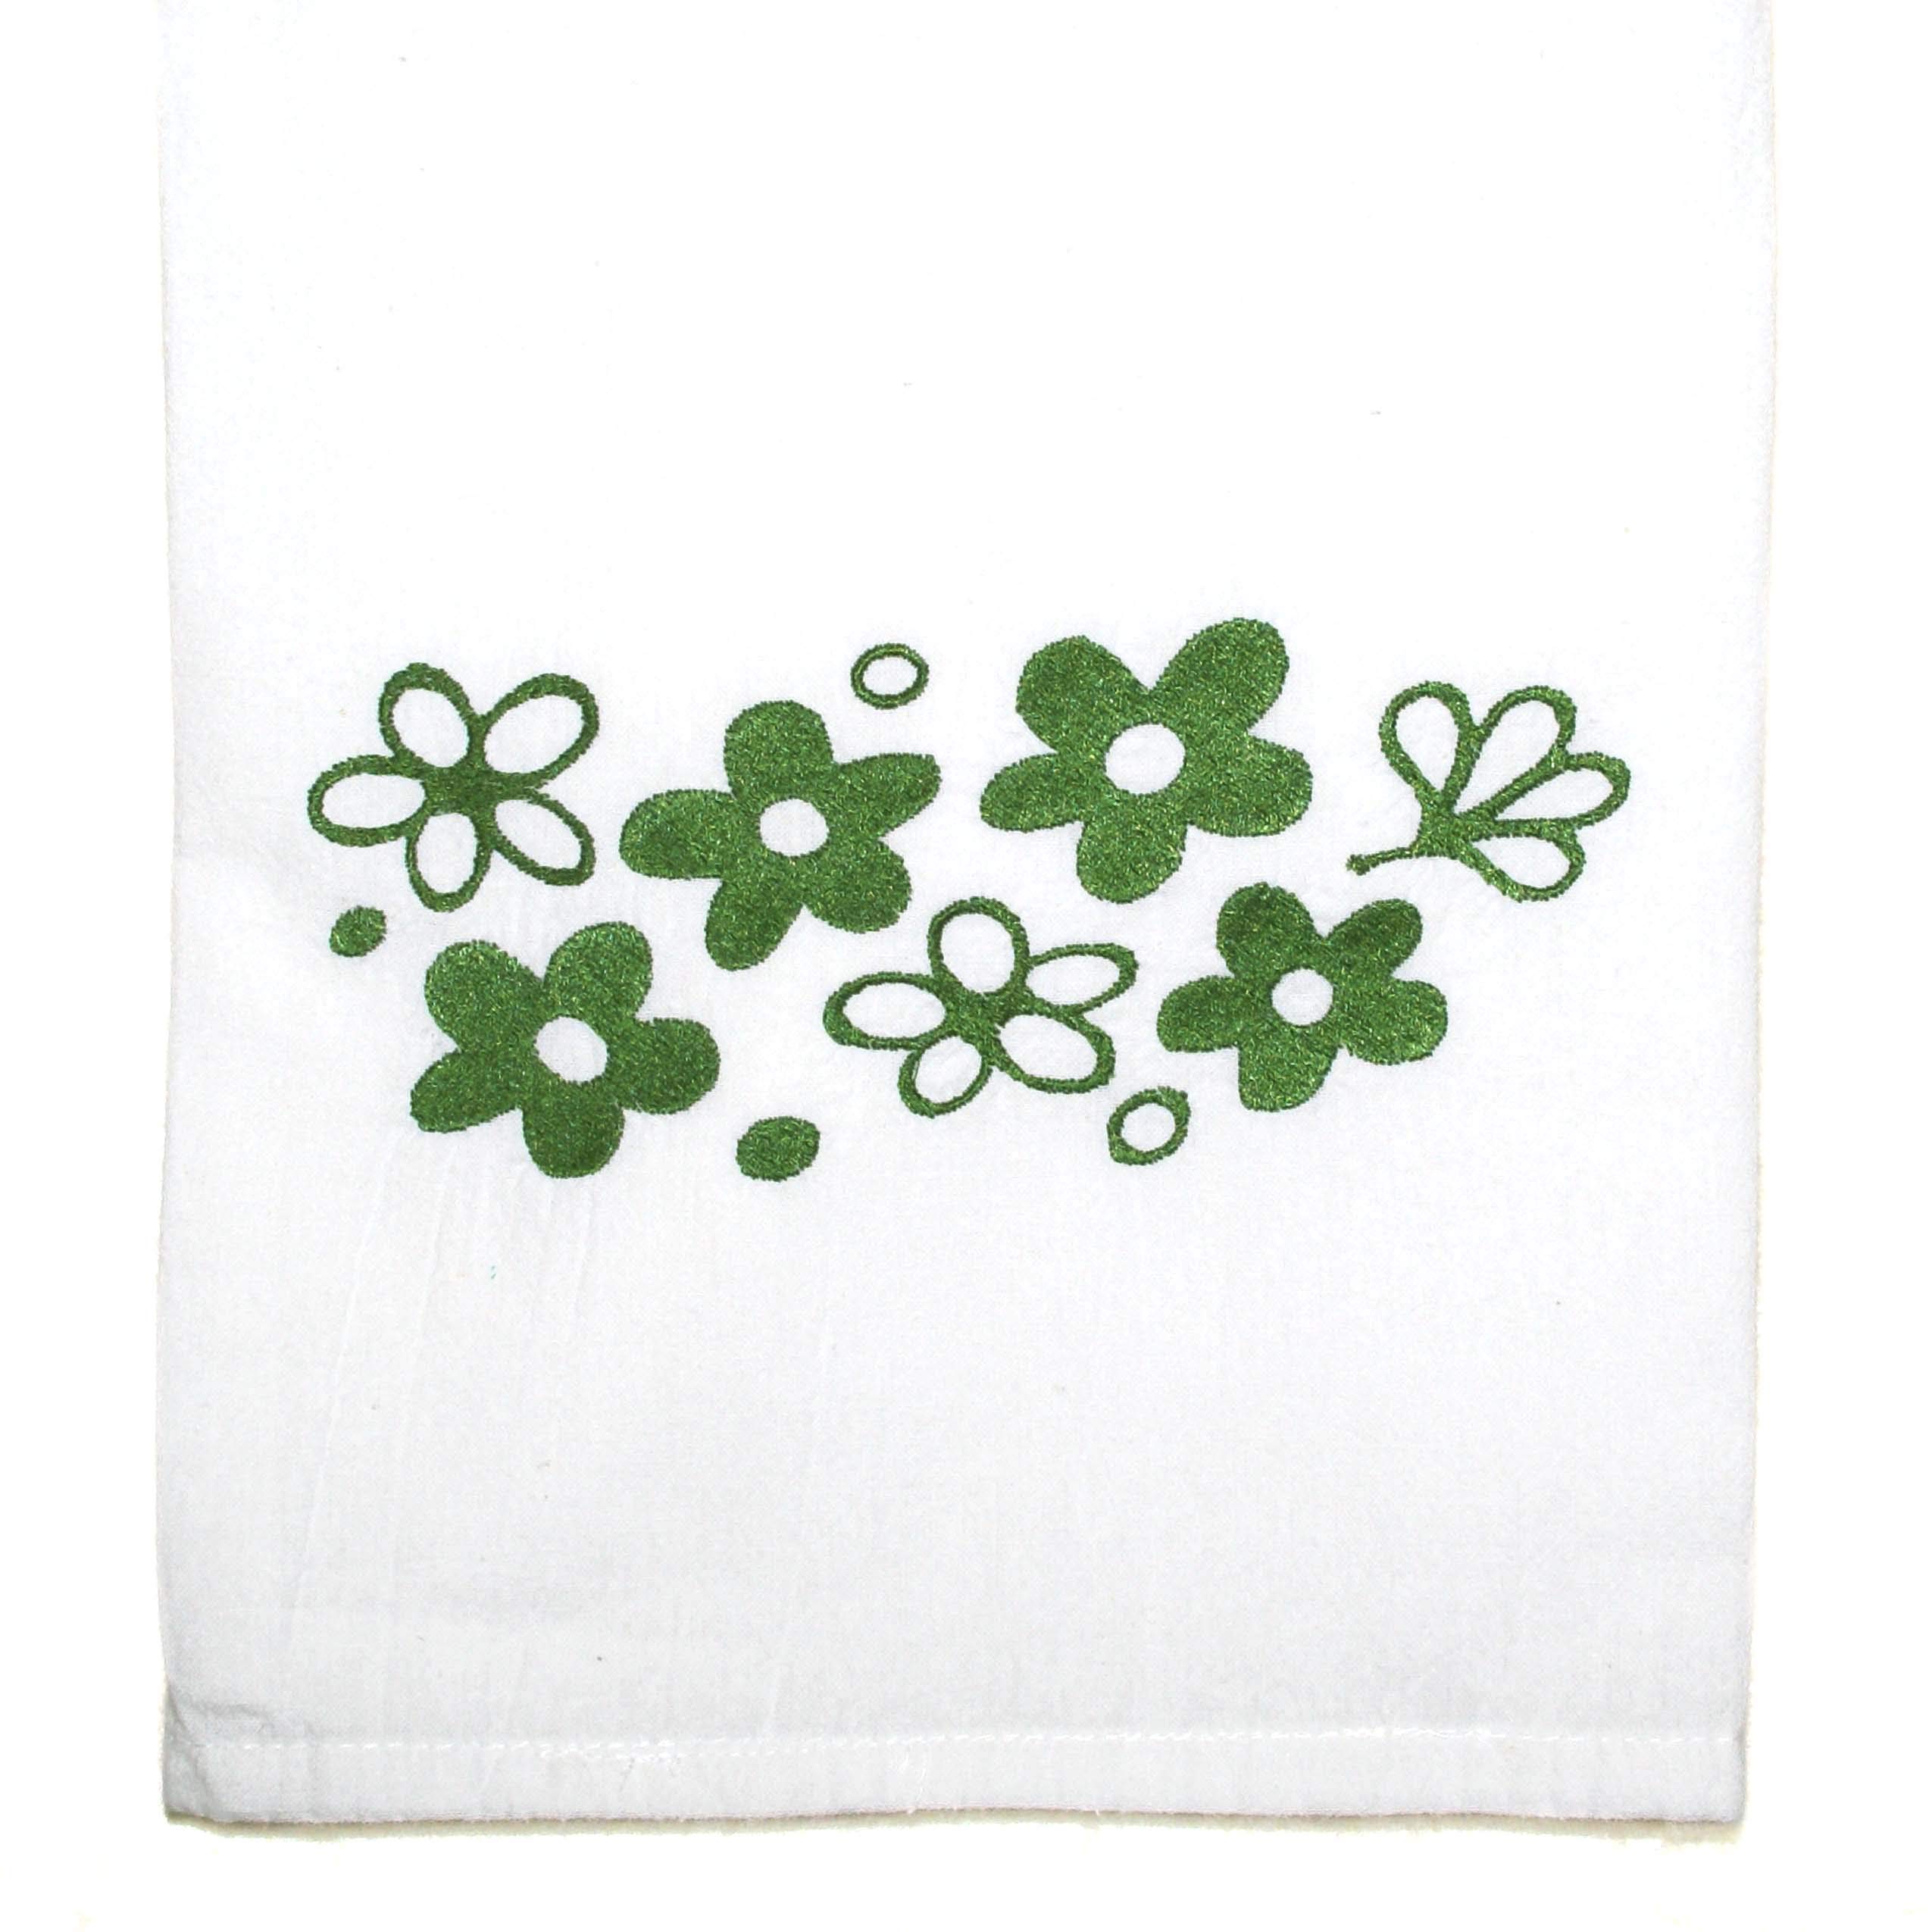 Embroidered Flour Sack Towel - Vintage Pyrex Pattern - Spring Blossom - 26 inch x 26 inch - Kitchen Dish Towel - Handmade by Green Acorn Kitchen